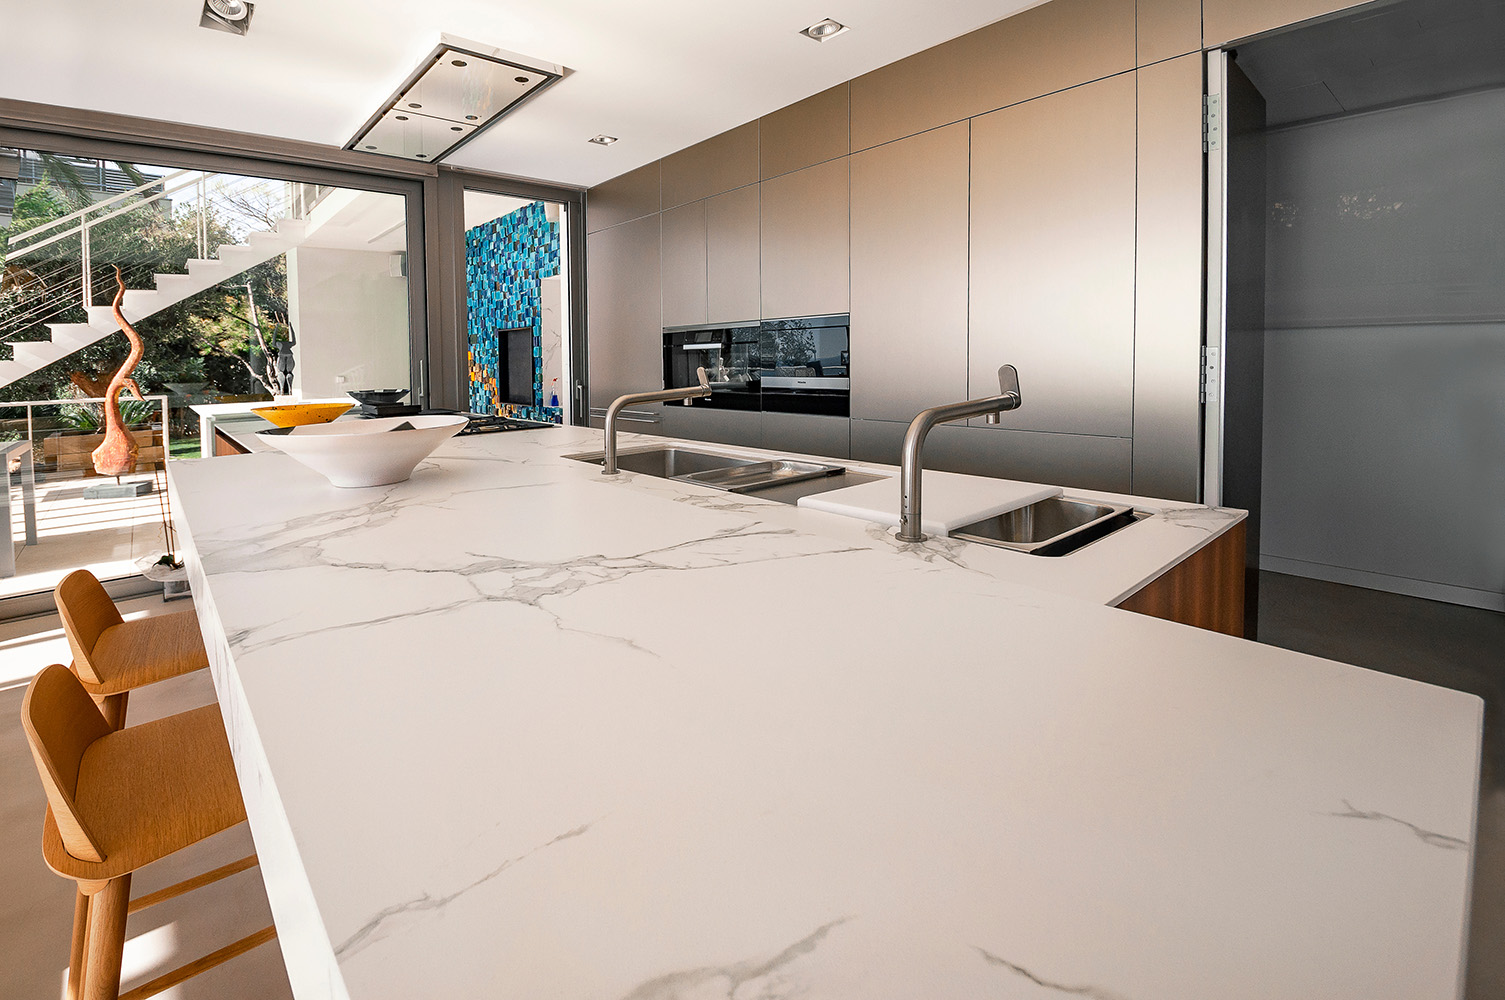 Honed Vs. Polished Marble Countertops